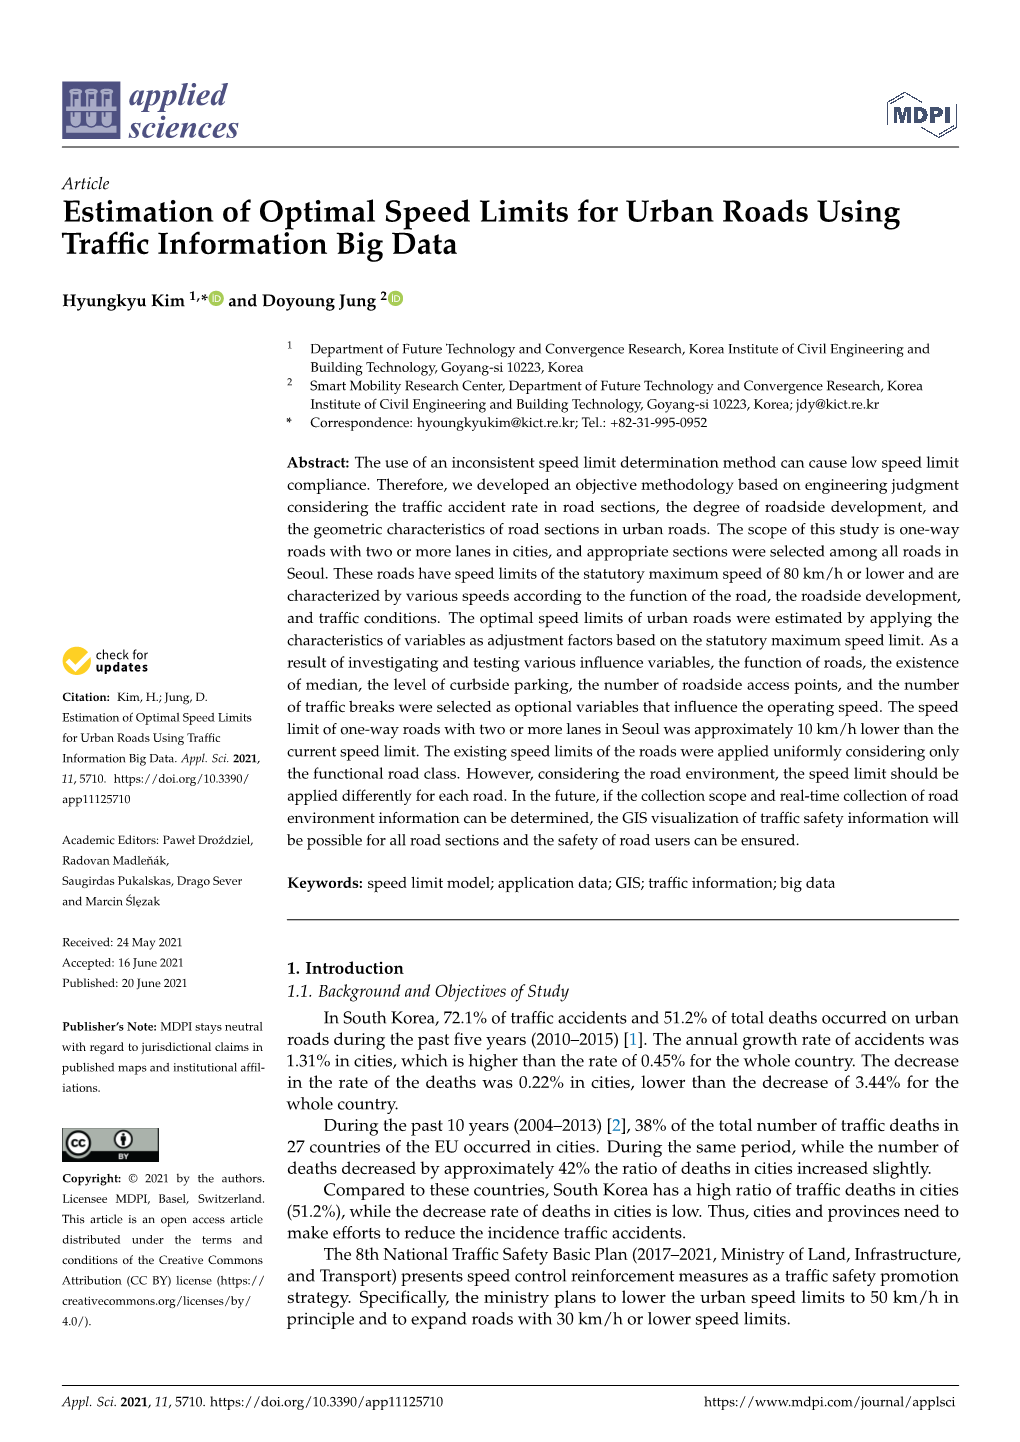 Estimation of Optimal Speed Limits for Urban Roads Using Traffic